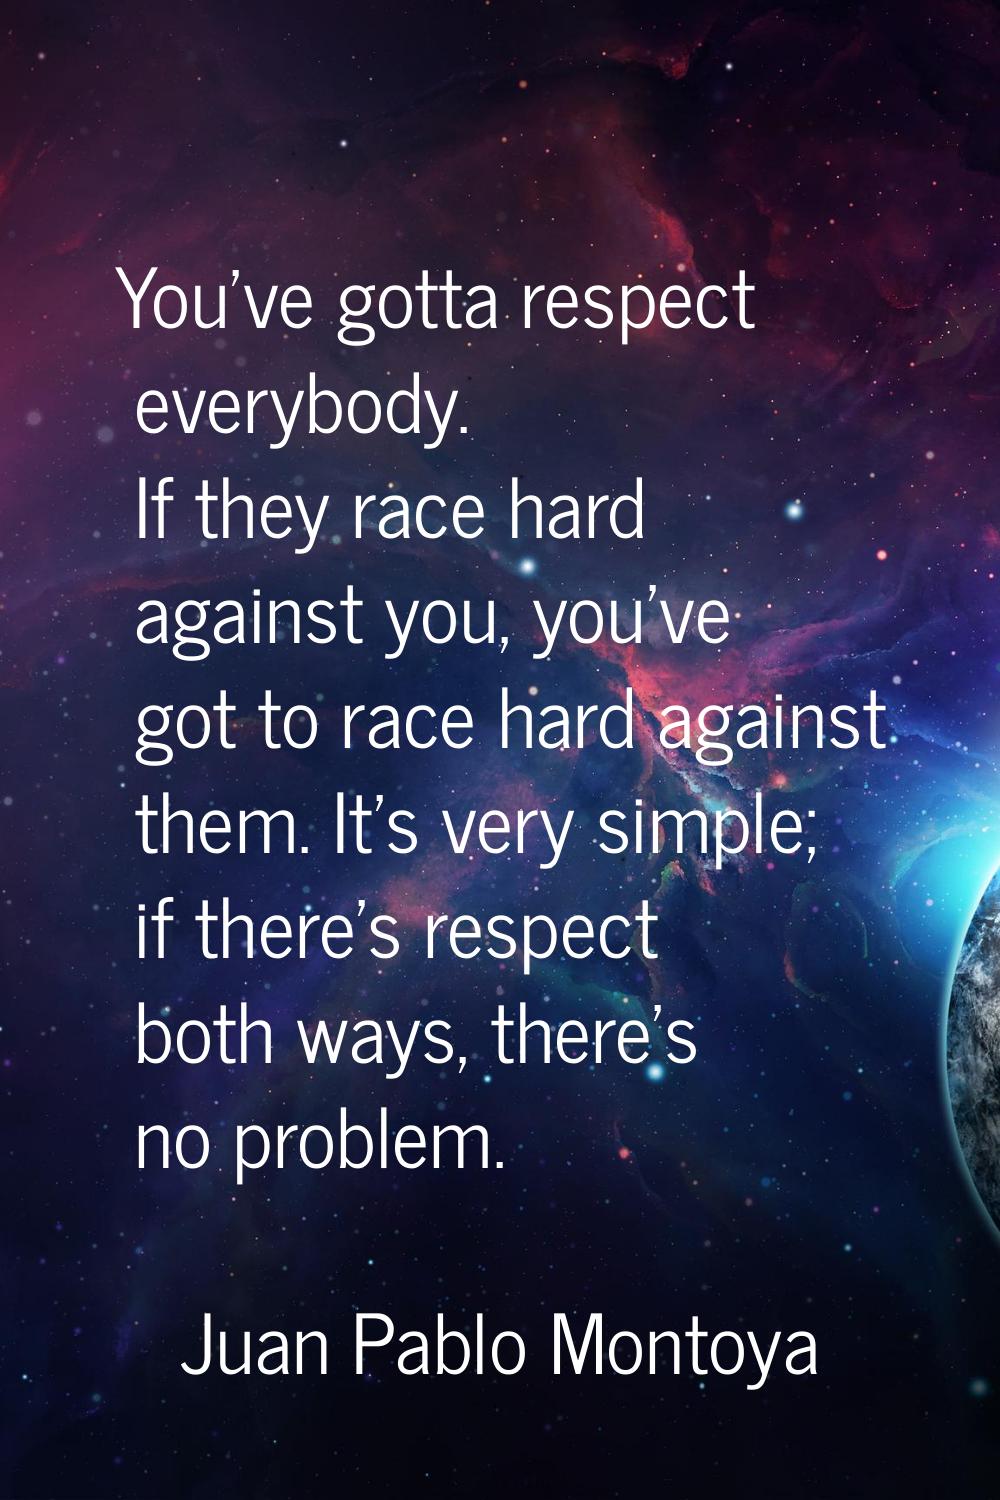 You've gotta respect everybody. If they race hard against you, you've got to race hard against them